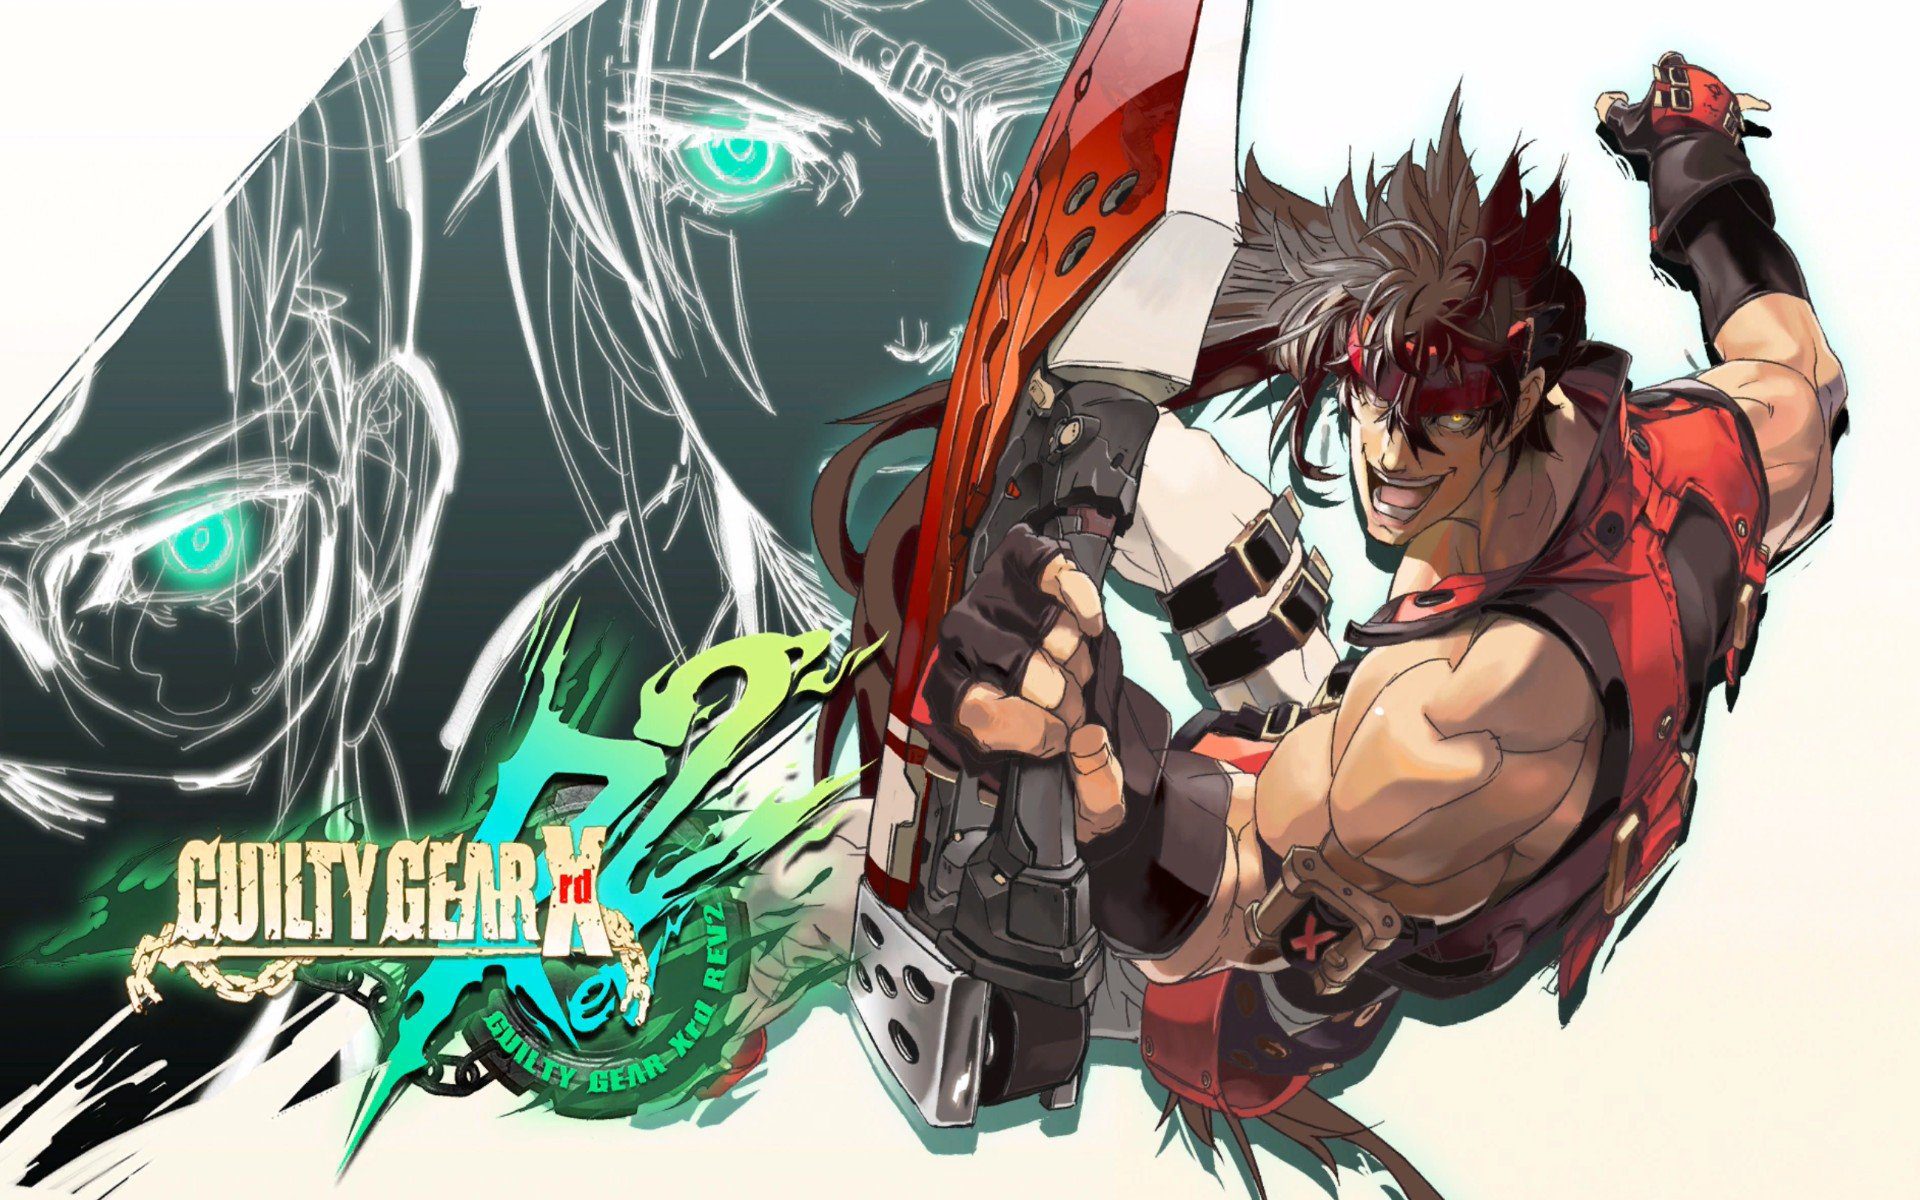 Guilty gear accent core plus r steam фото 89